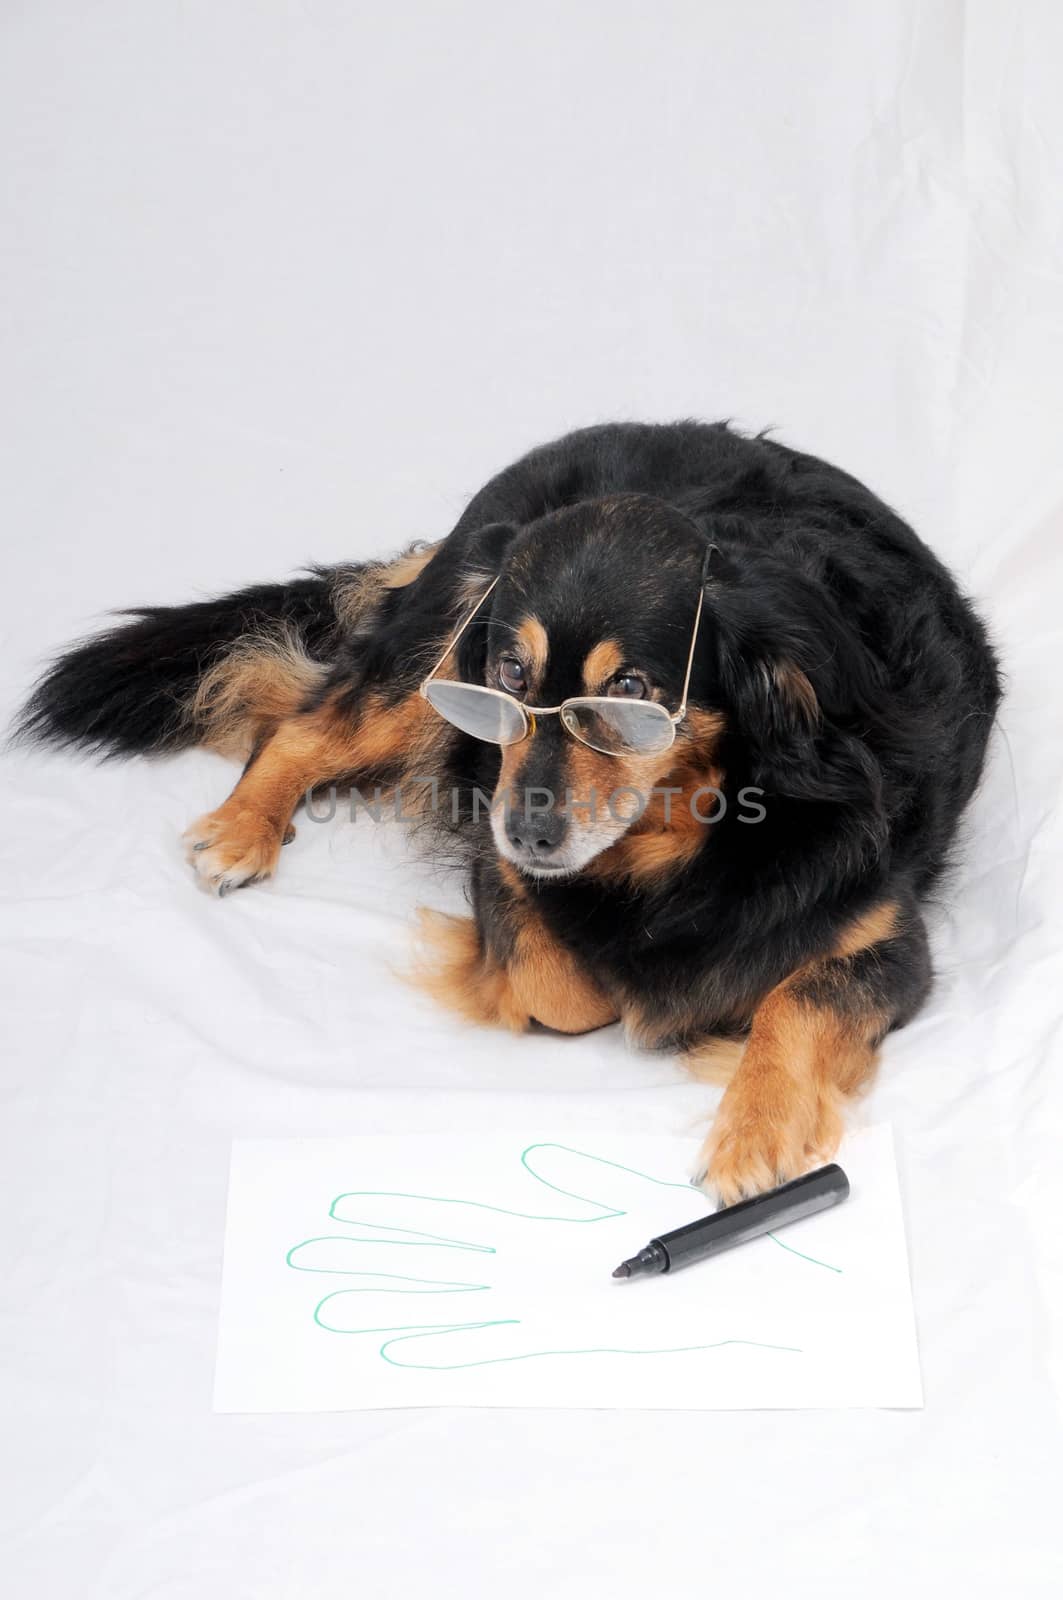 One Female Old Black Dog Drawing on a White Paper